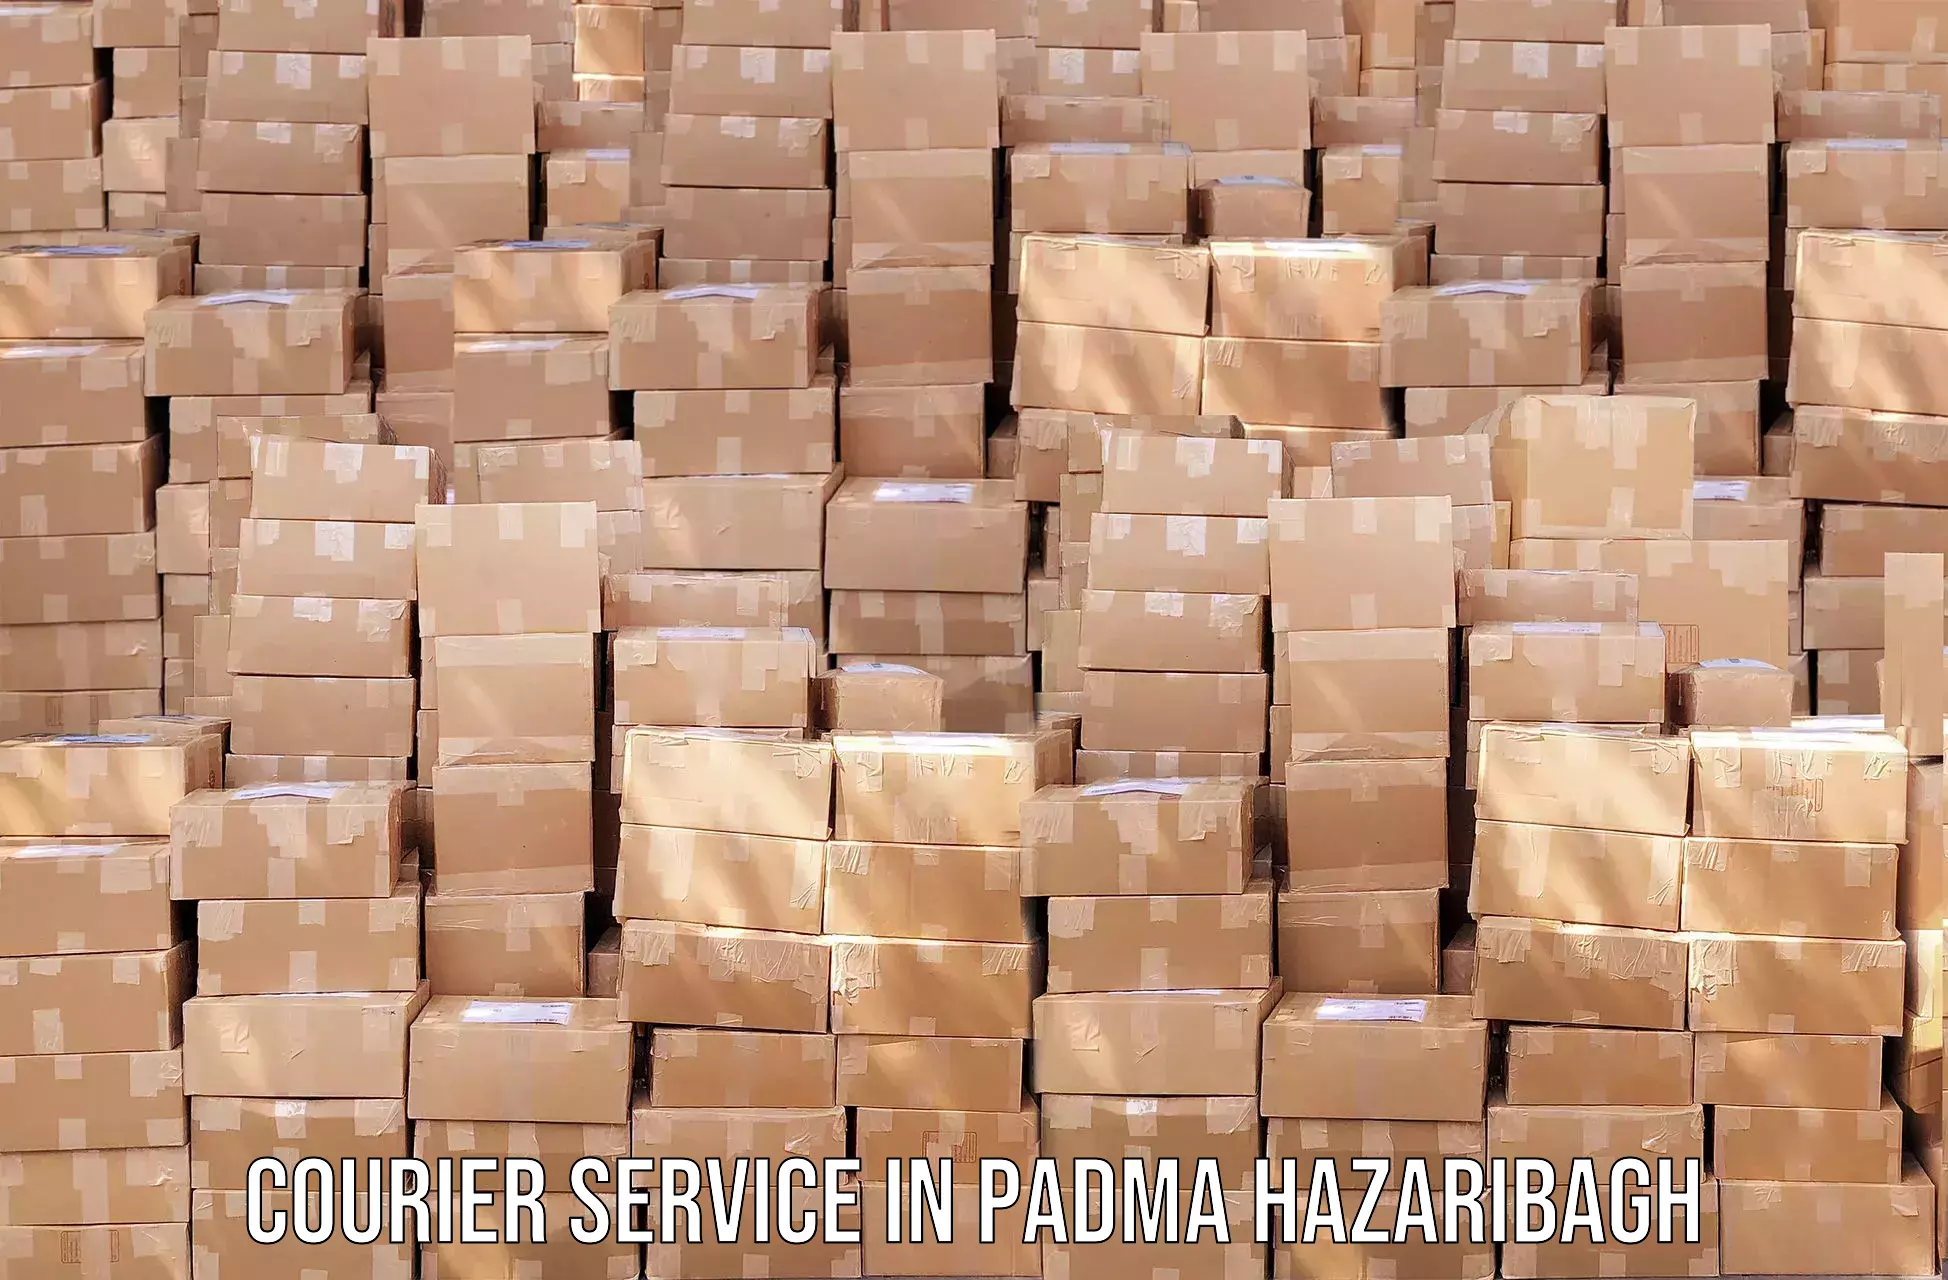 Courier service booking in Padma Hazaribagh